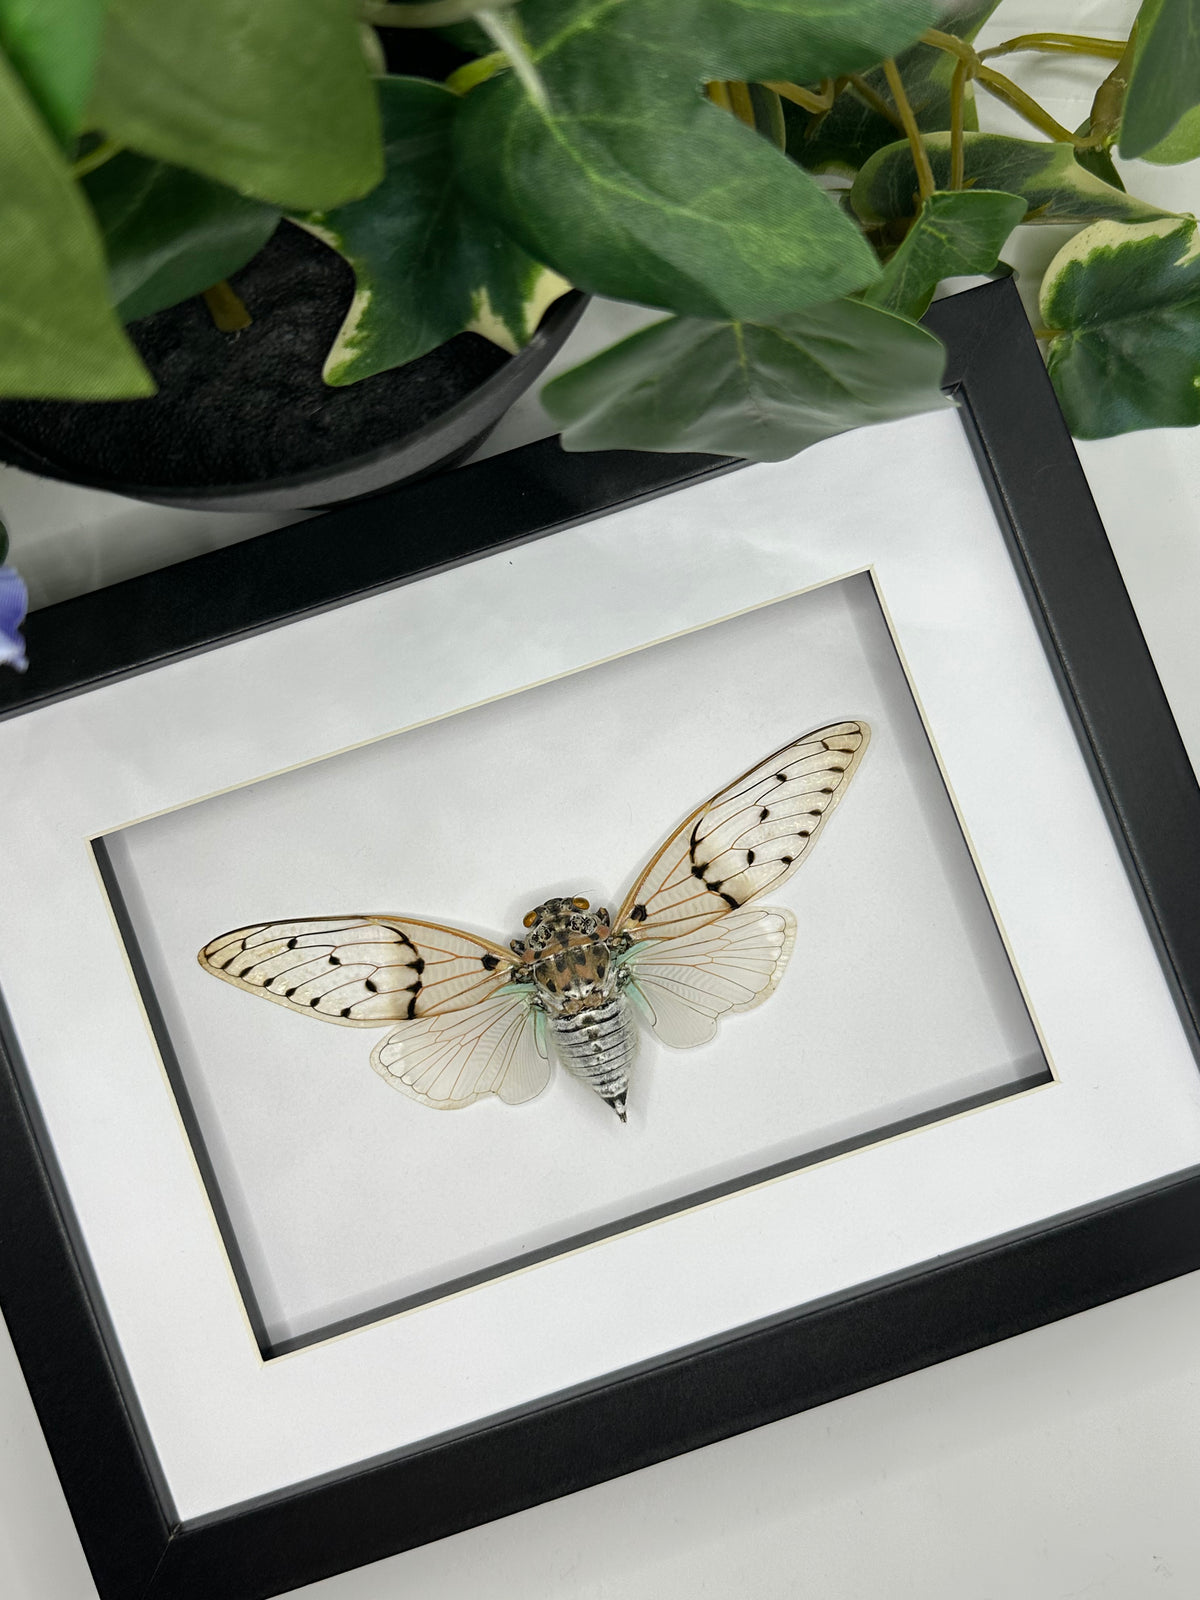 White Ghost Cicada / Ayuthia Spectabile in a larger frame